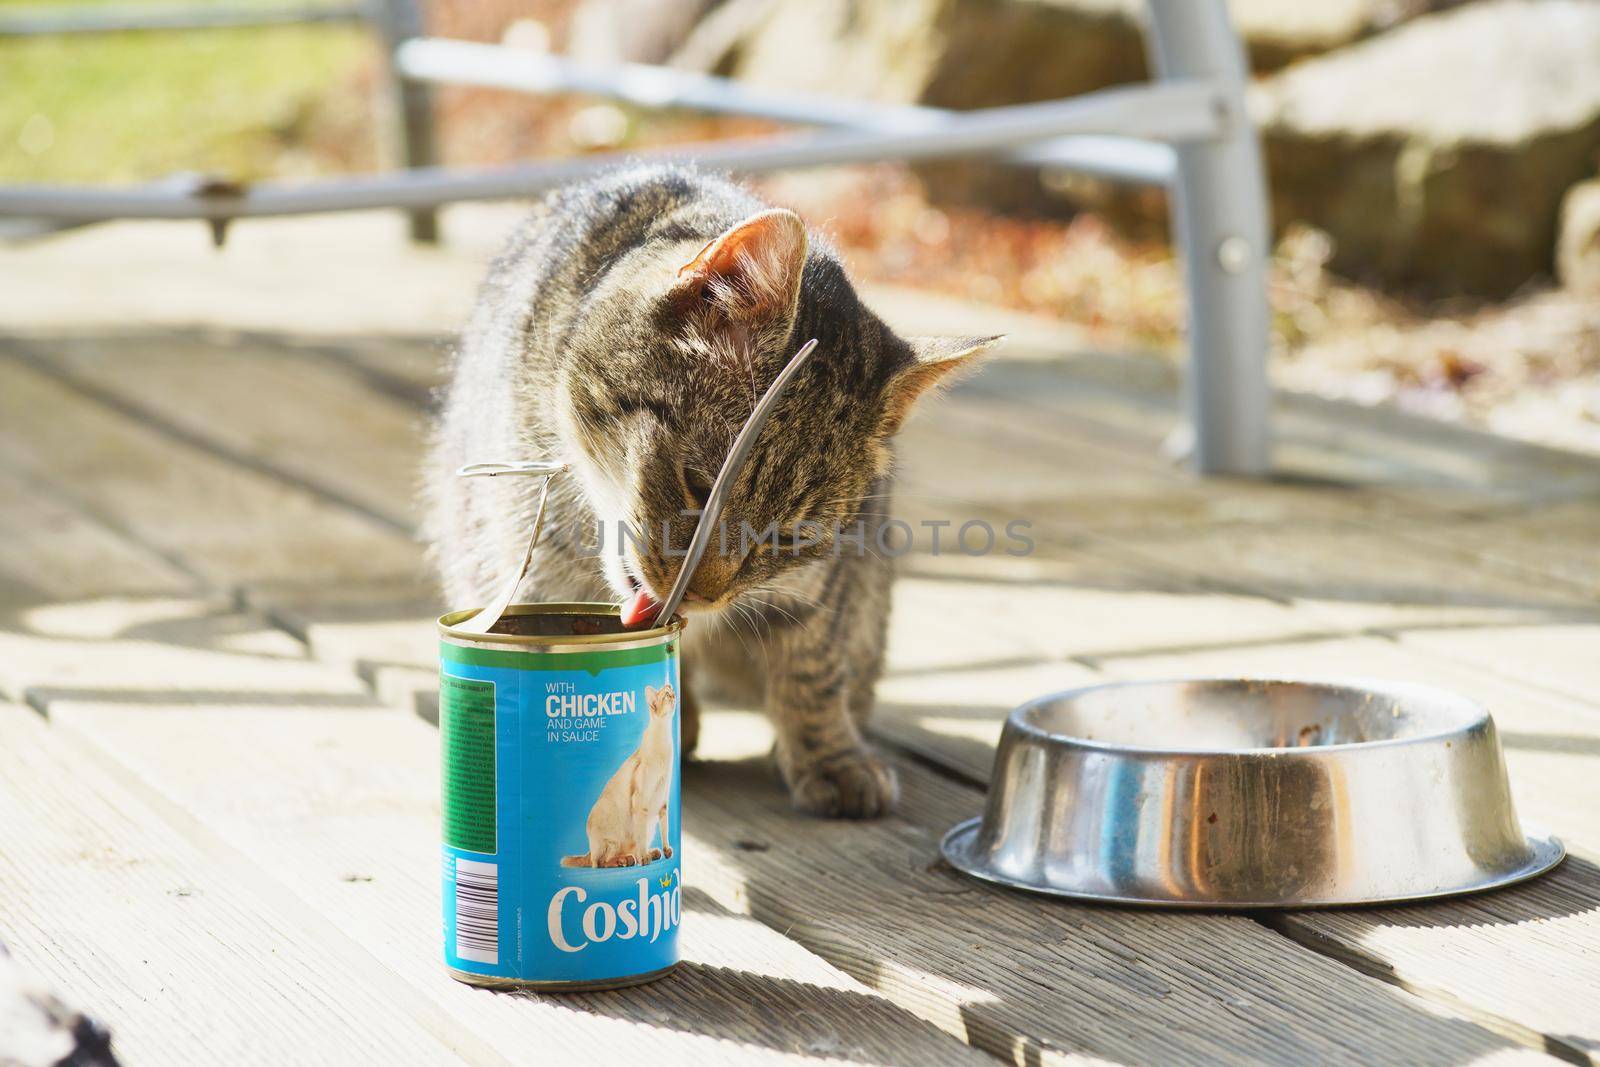 Strancice, Czech Republic - March 25 2021: A cat tasting Coshida branded pet food made for Lidl